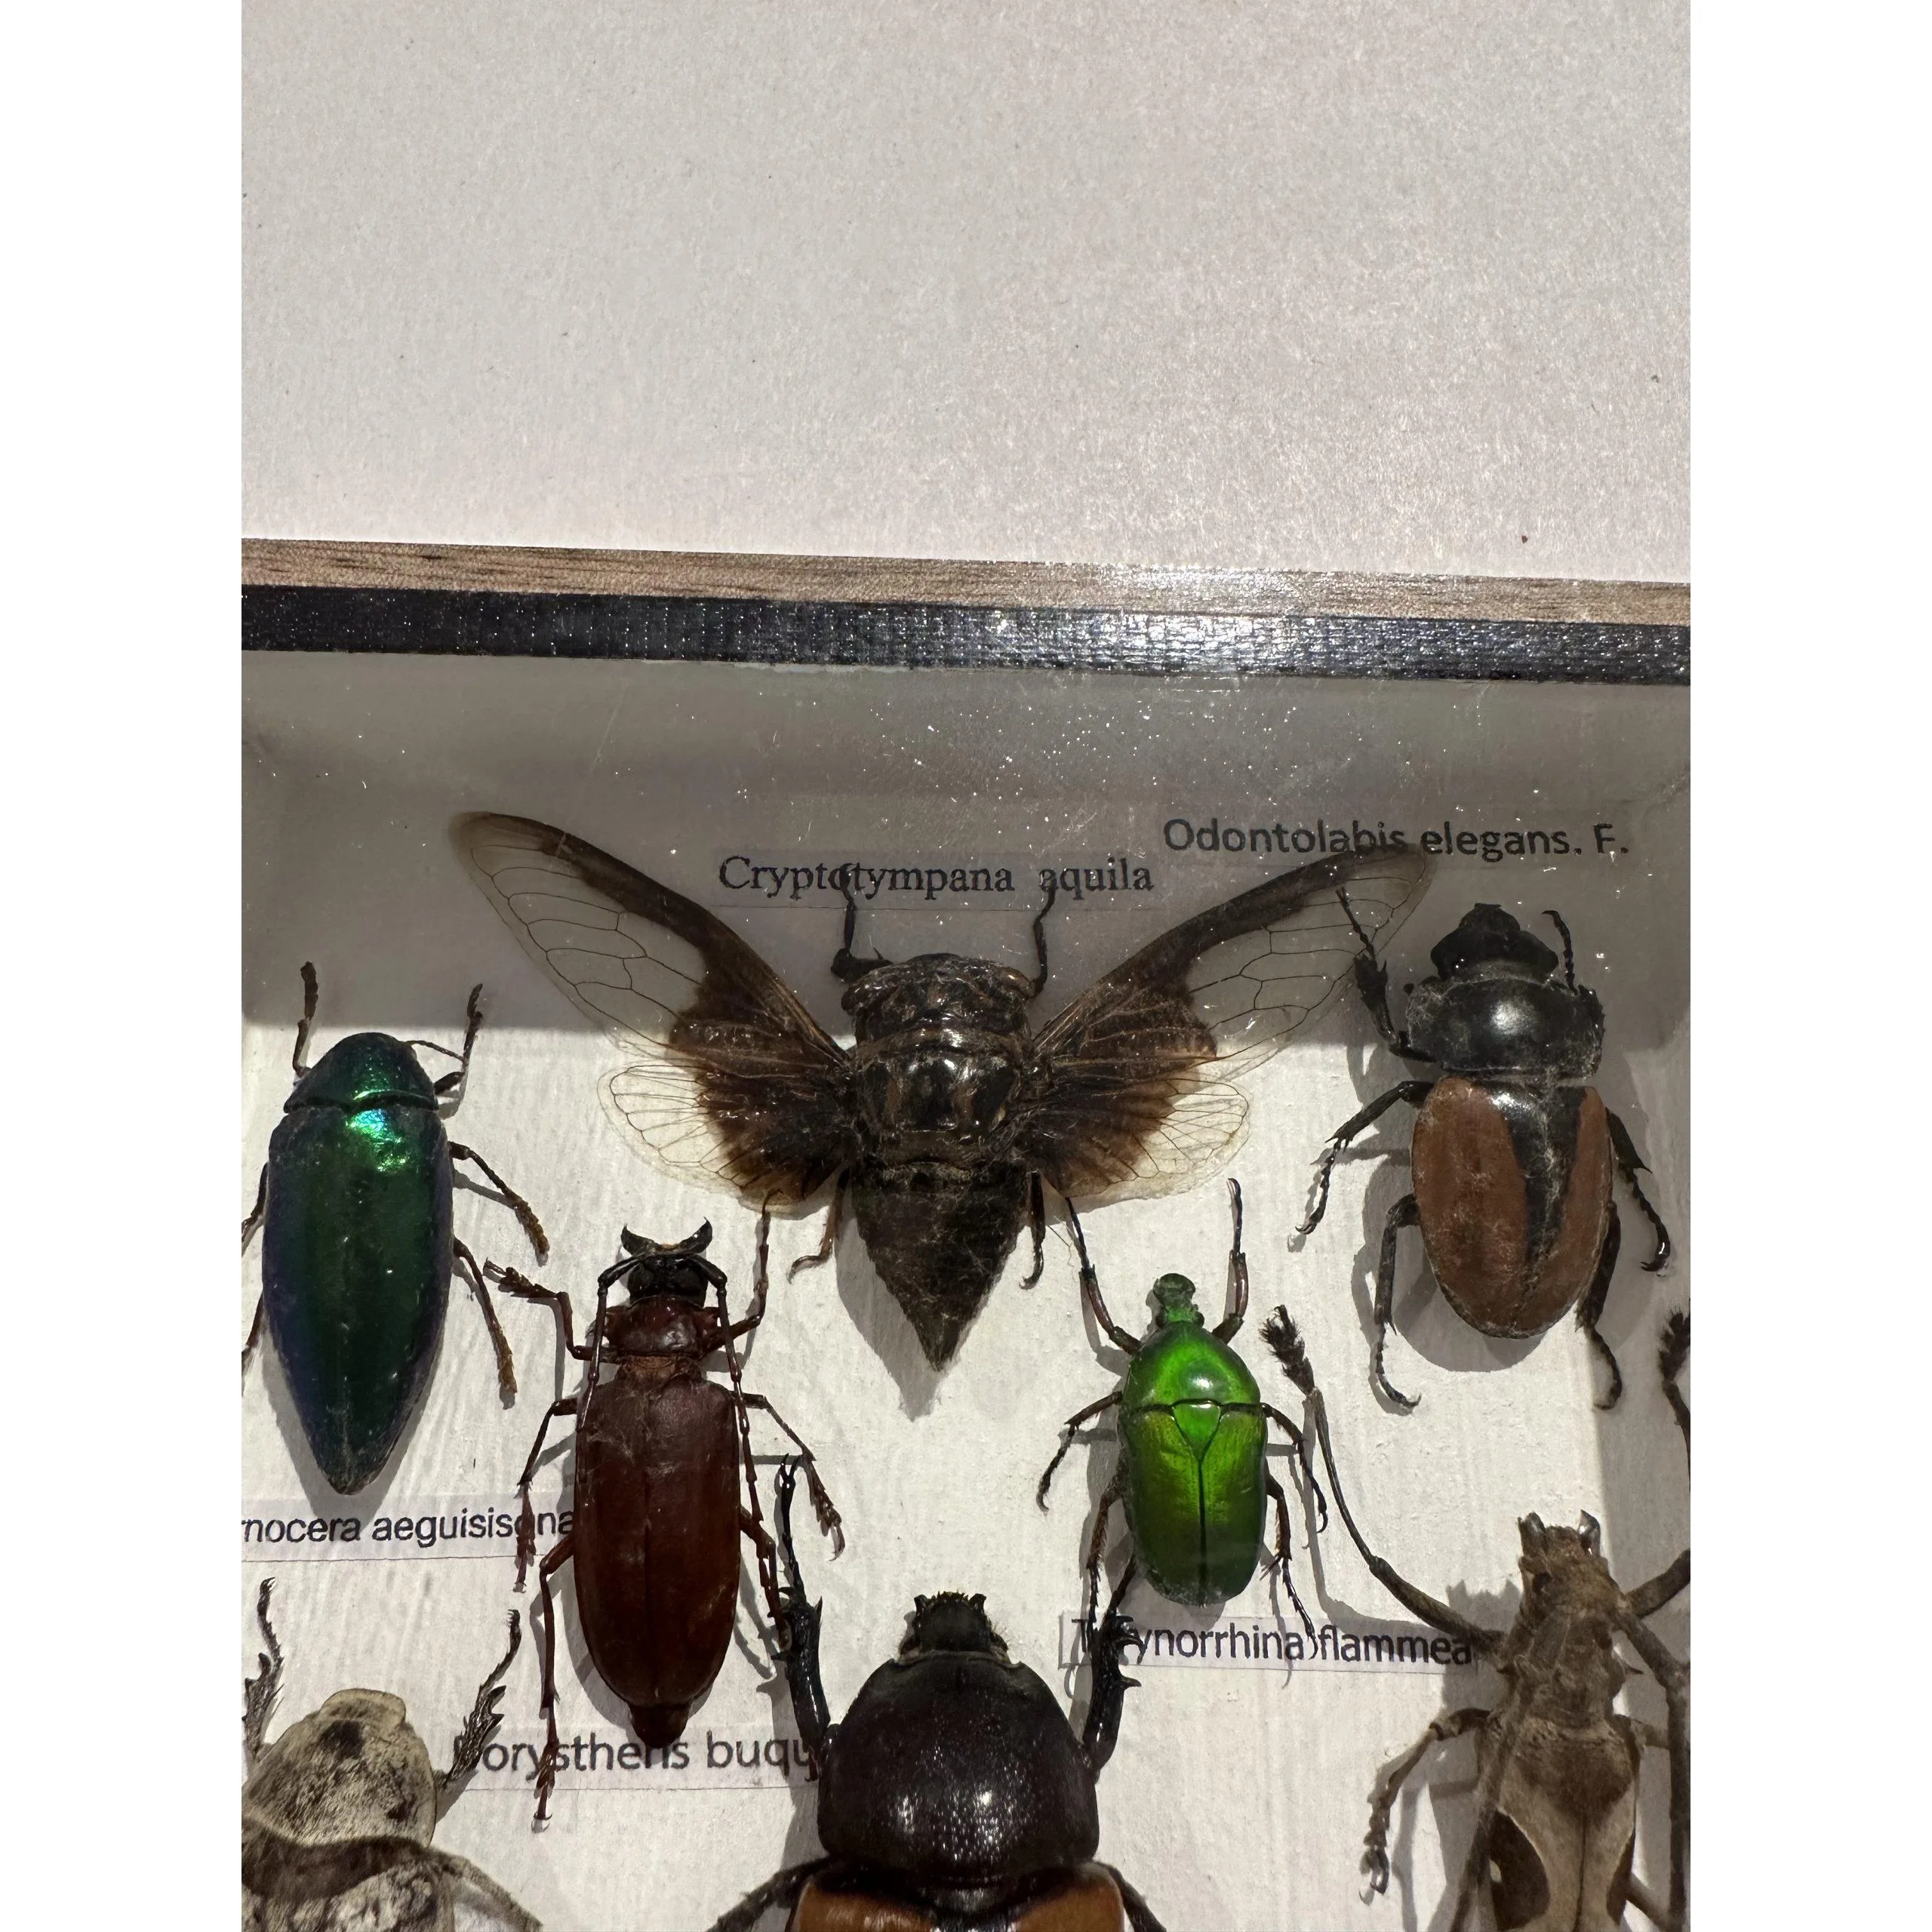 Beetle group professionally preserved and framed Prehistoric Online